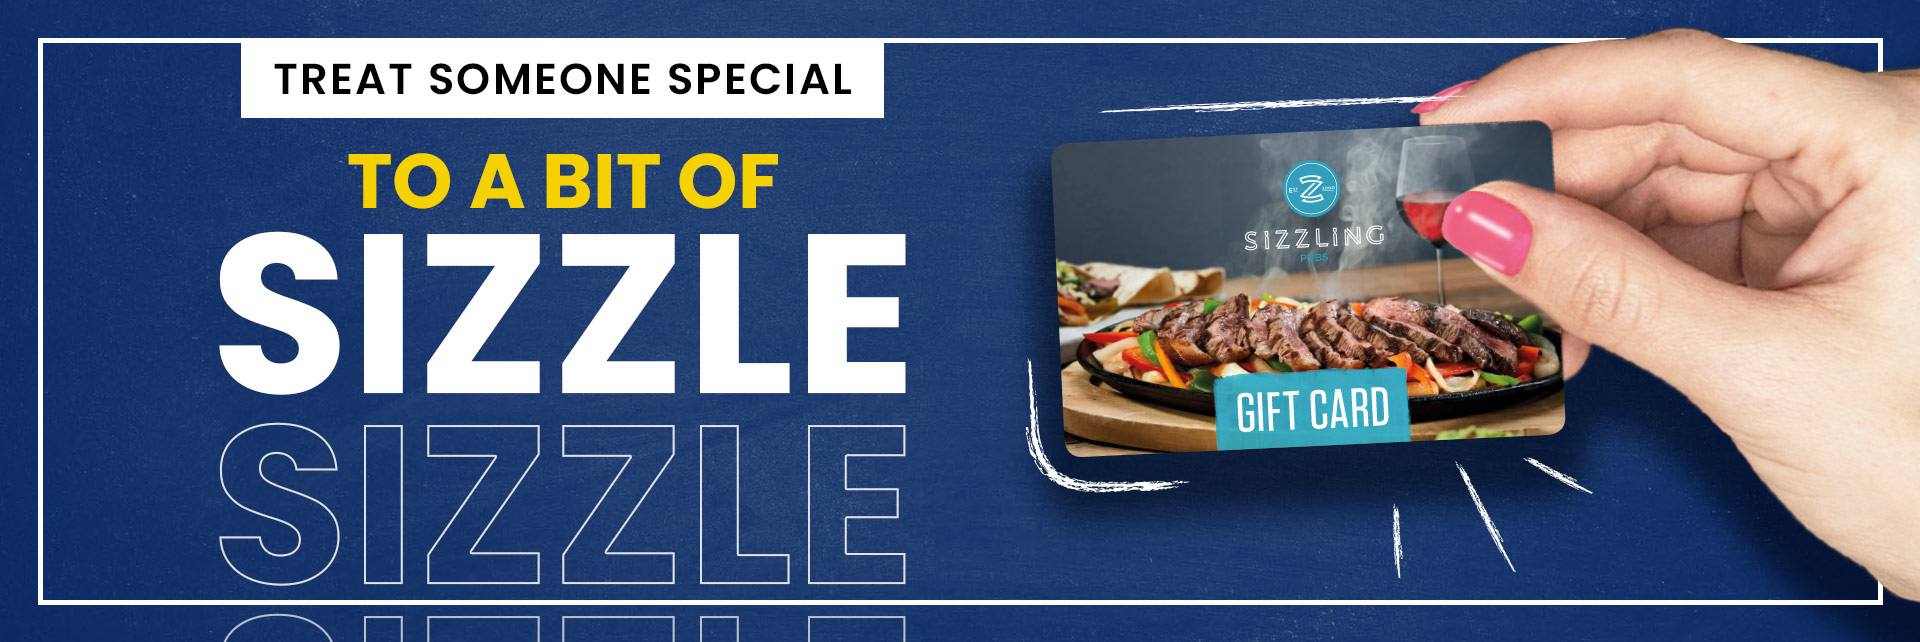 Sizzling Pubs Gift Card at The Devonshire Arms, Blackpool in Blackpool